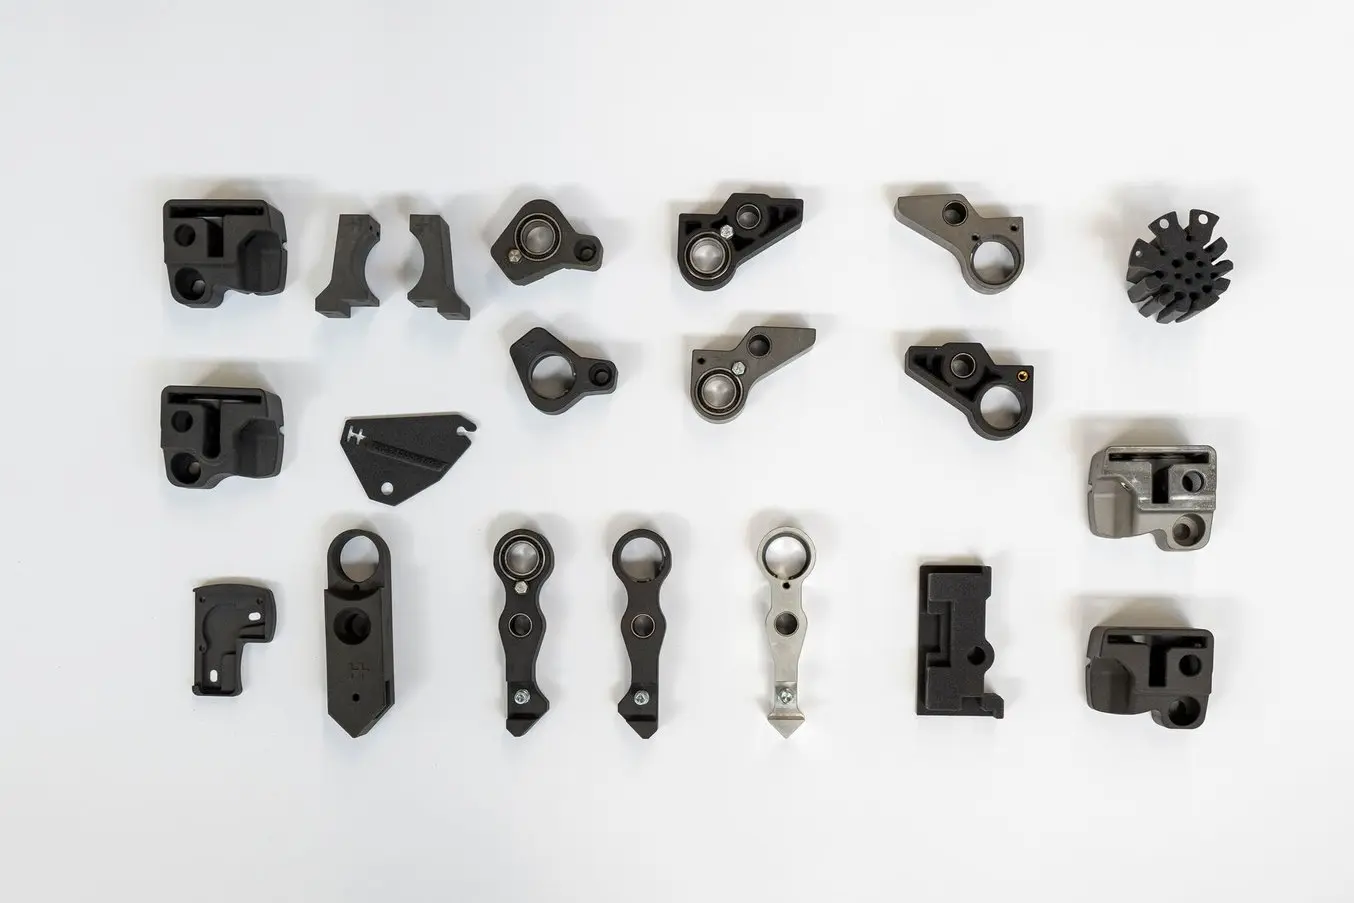 HEIDELBERG uses 3D printed parts for a wide range of applications, including lightweight parts for robots and replacements for machine components previously manufactured in steel.